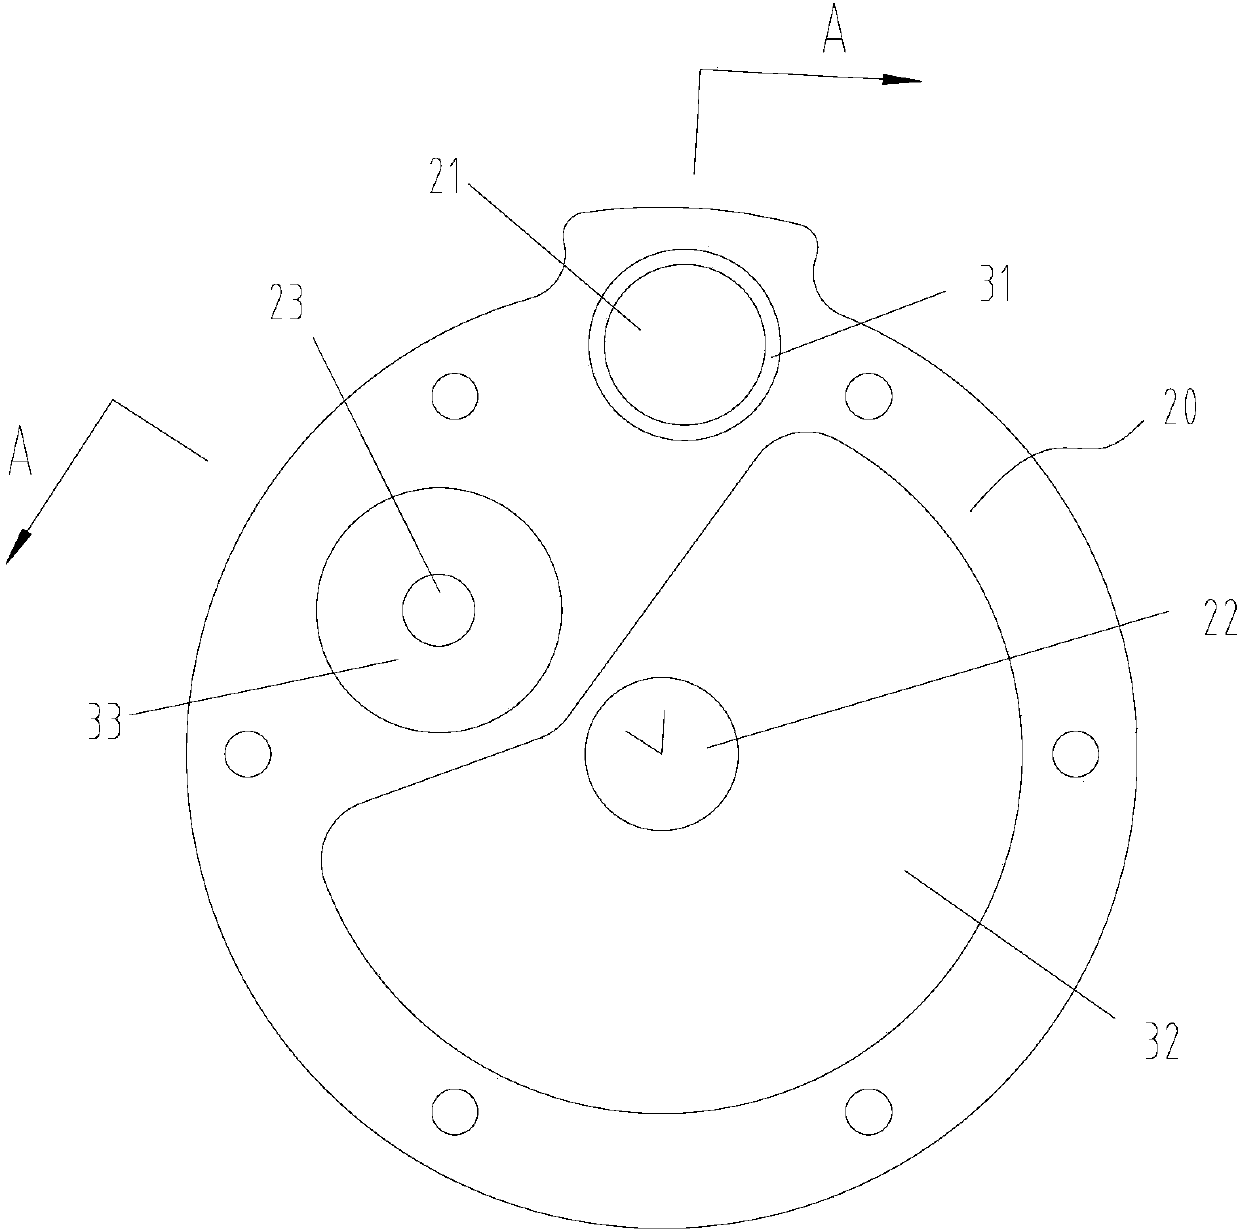 Scroll compressor and air conditioner with same